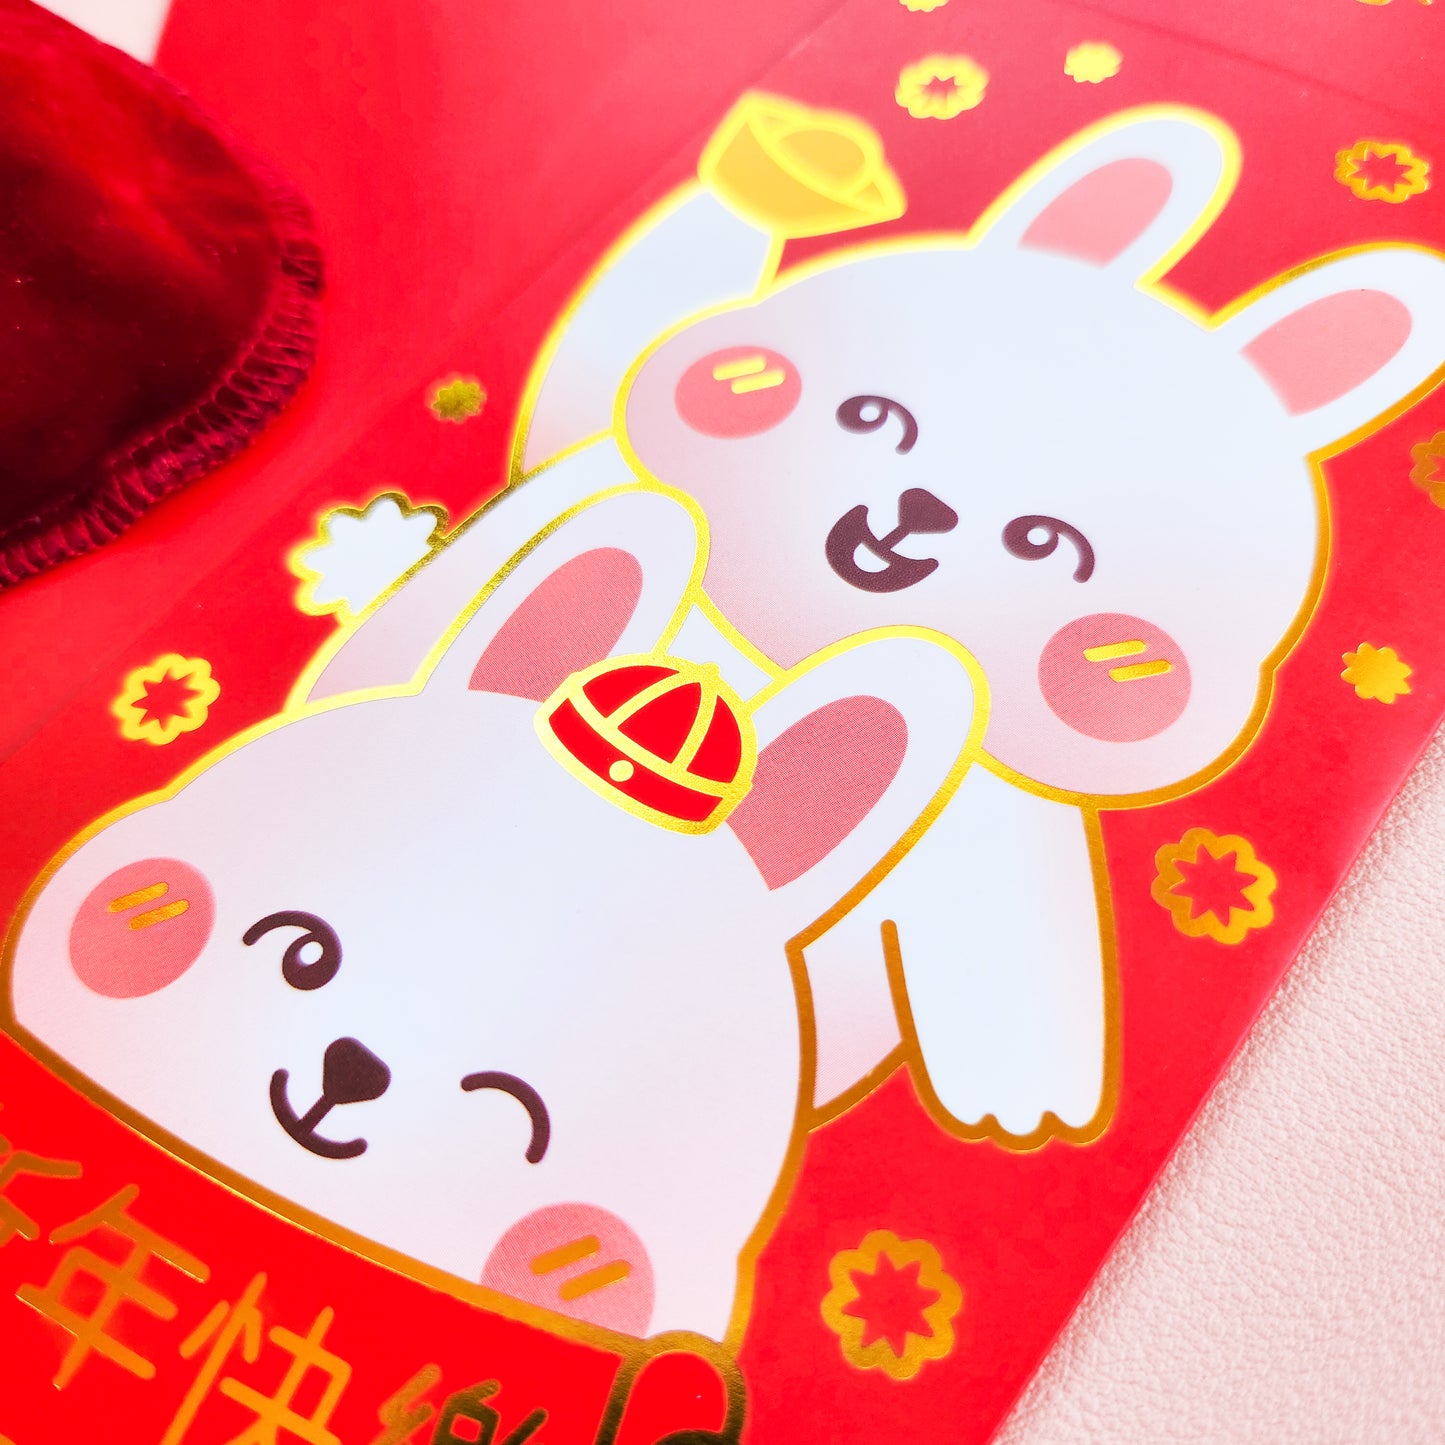 Year of the Rabbit Assorted Bundle Red Envelopes Happy New Year & Good Fortune